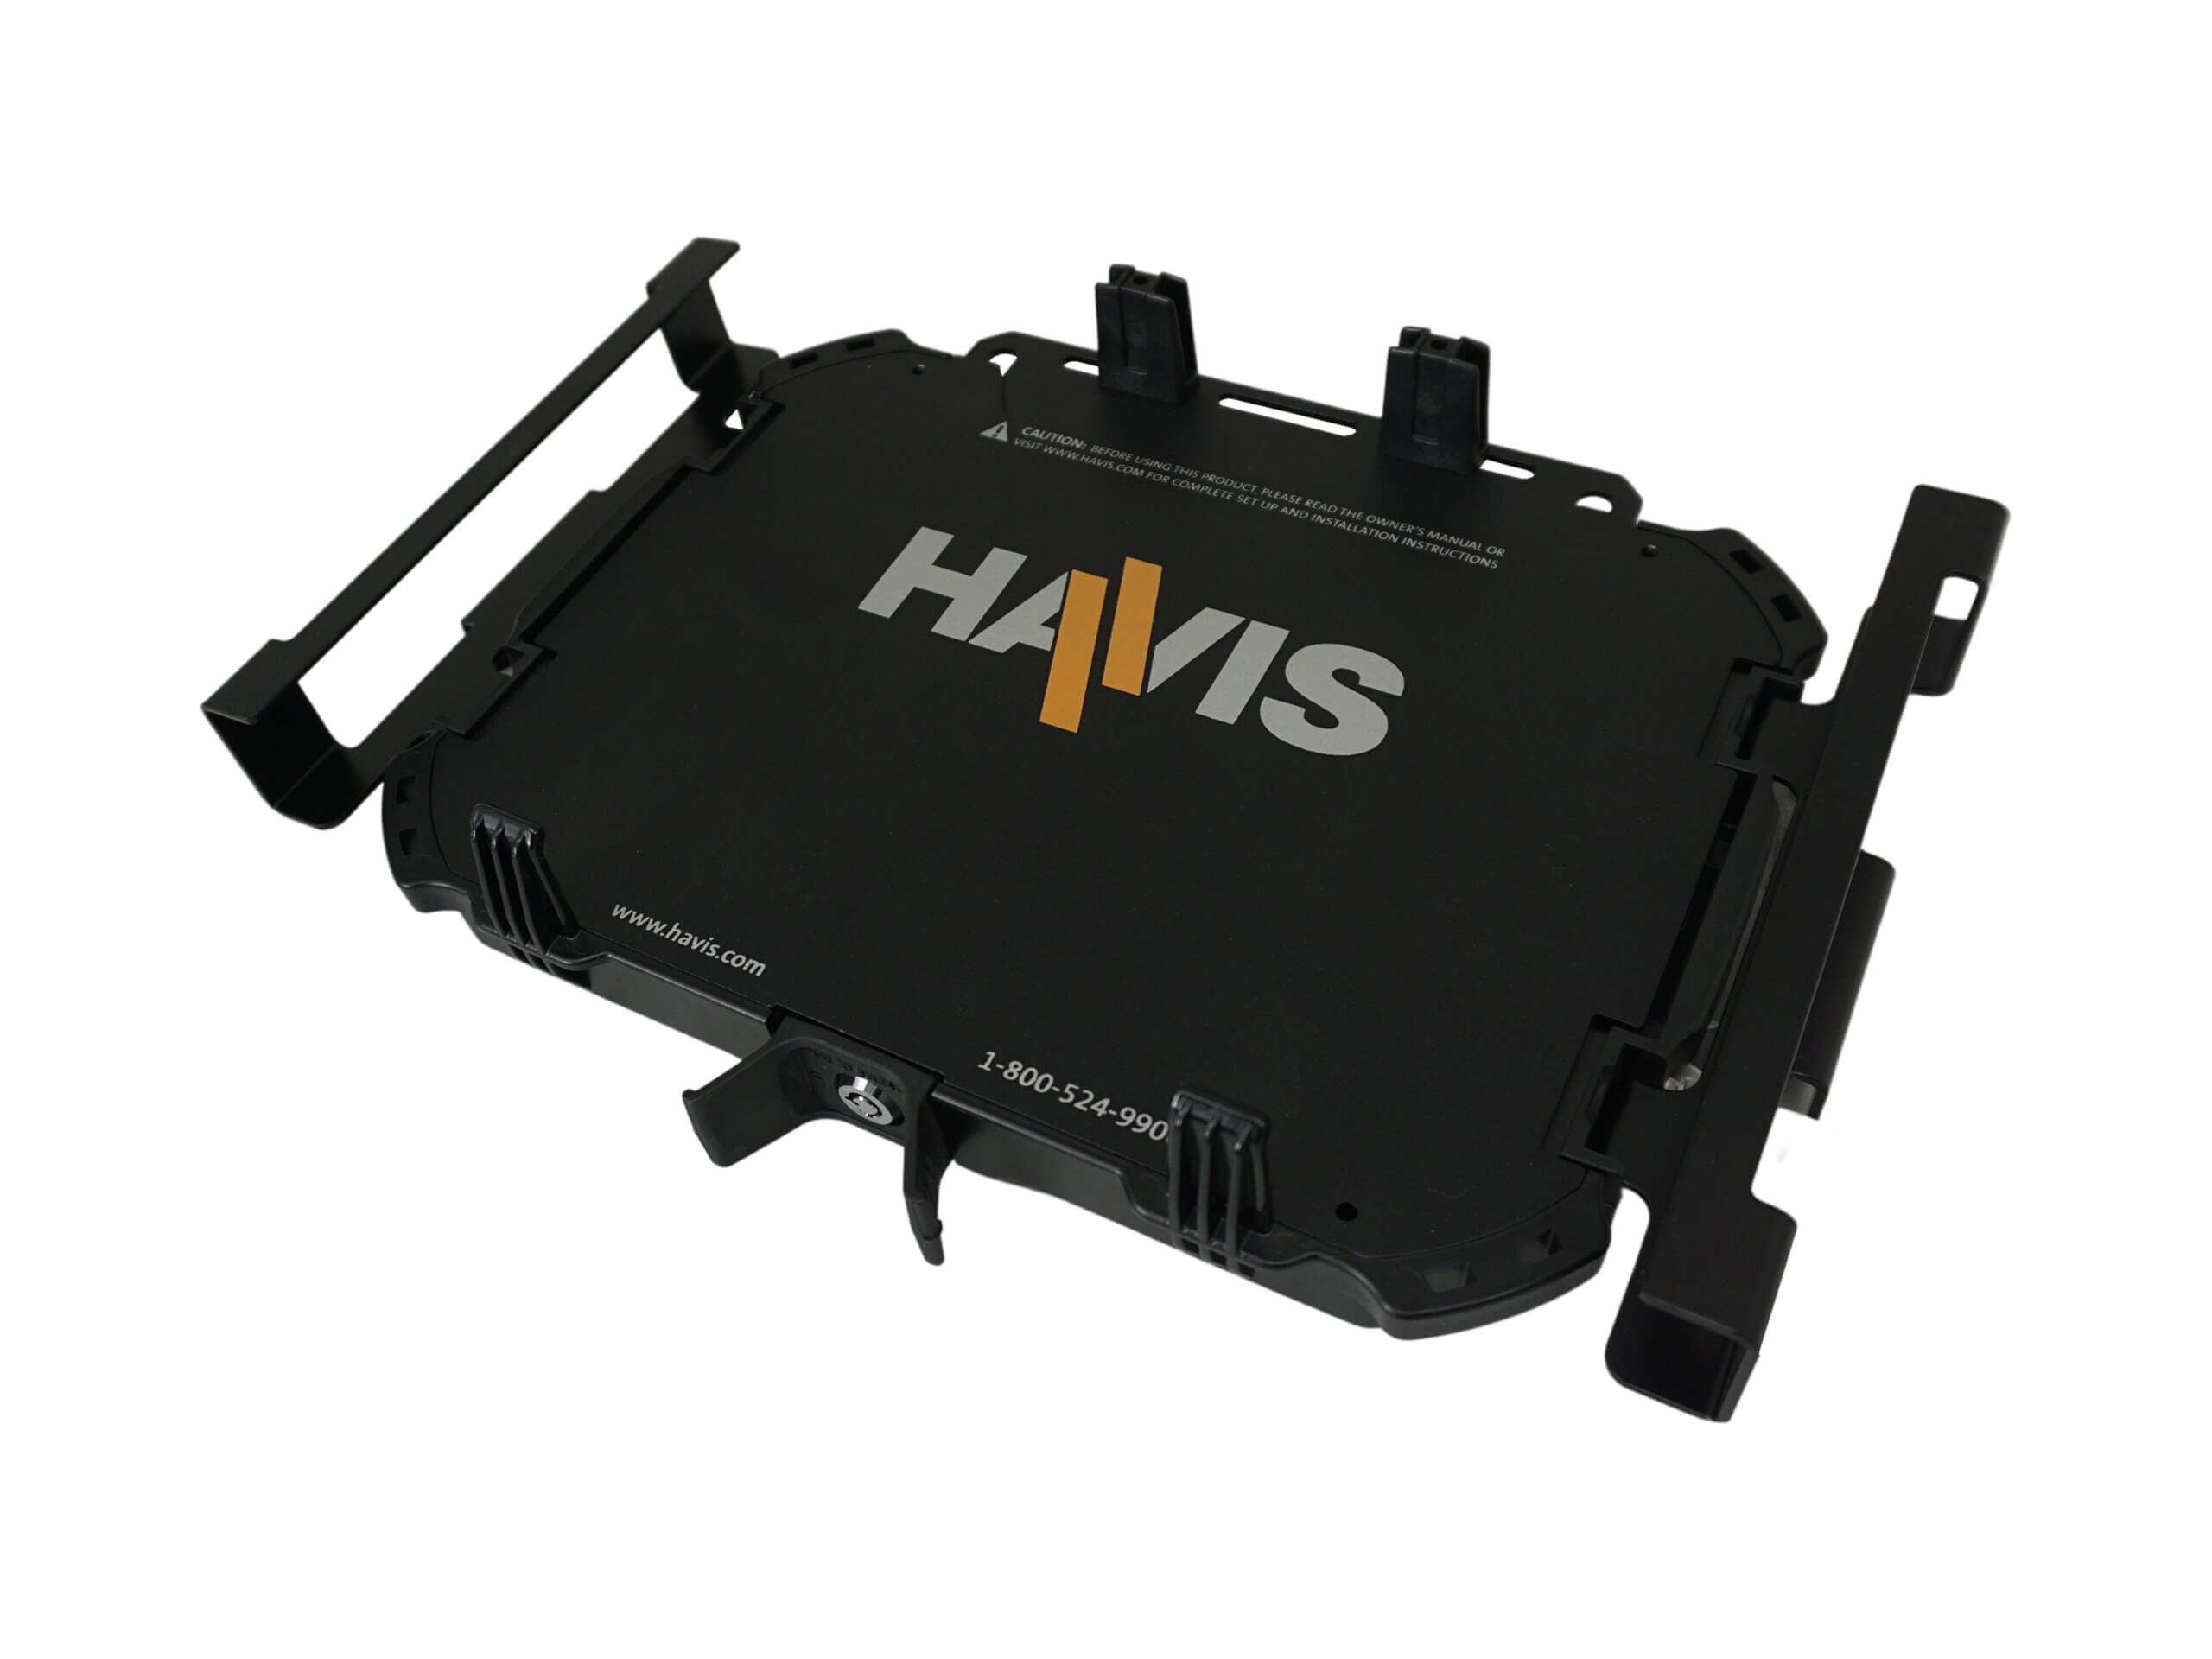 Havis Rugged Cradle for Dell 7230 Rugged Extreme Tablet